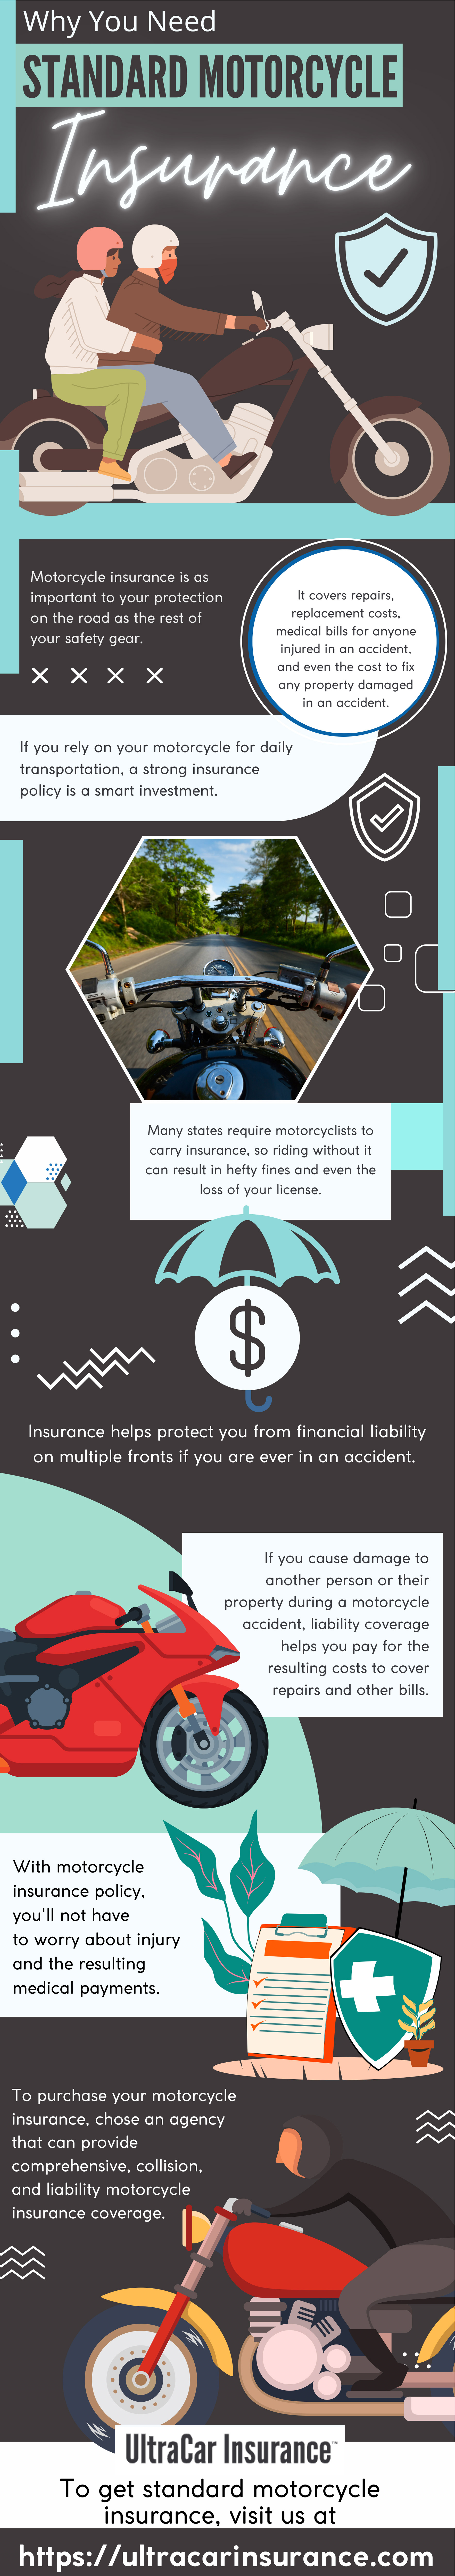 Why You Need Standard Motorcycle Insurance Infograph